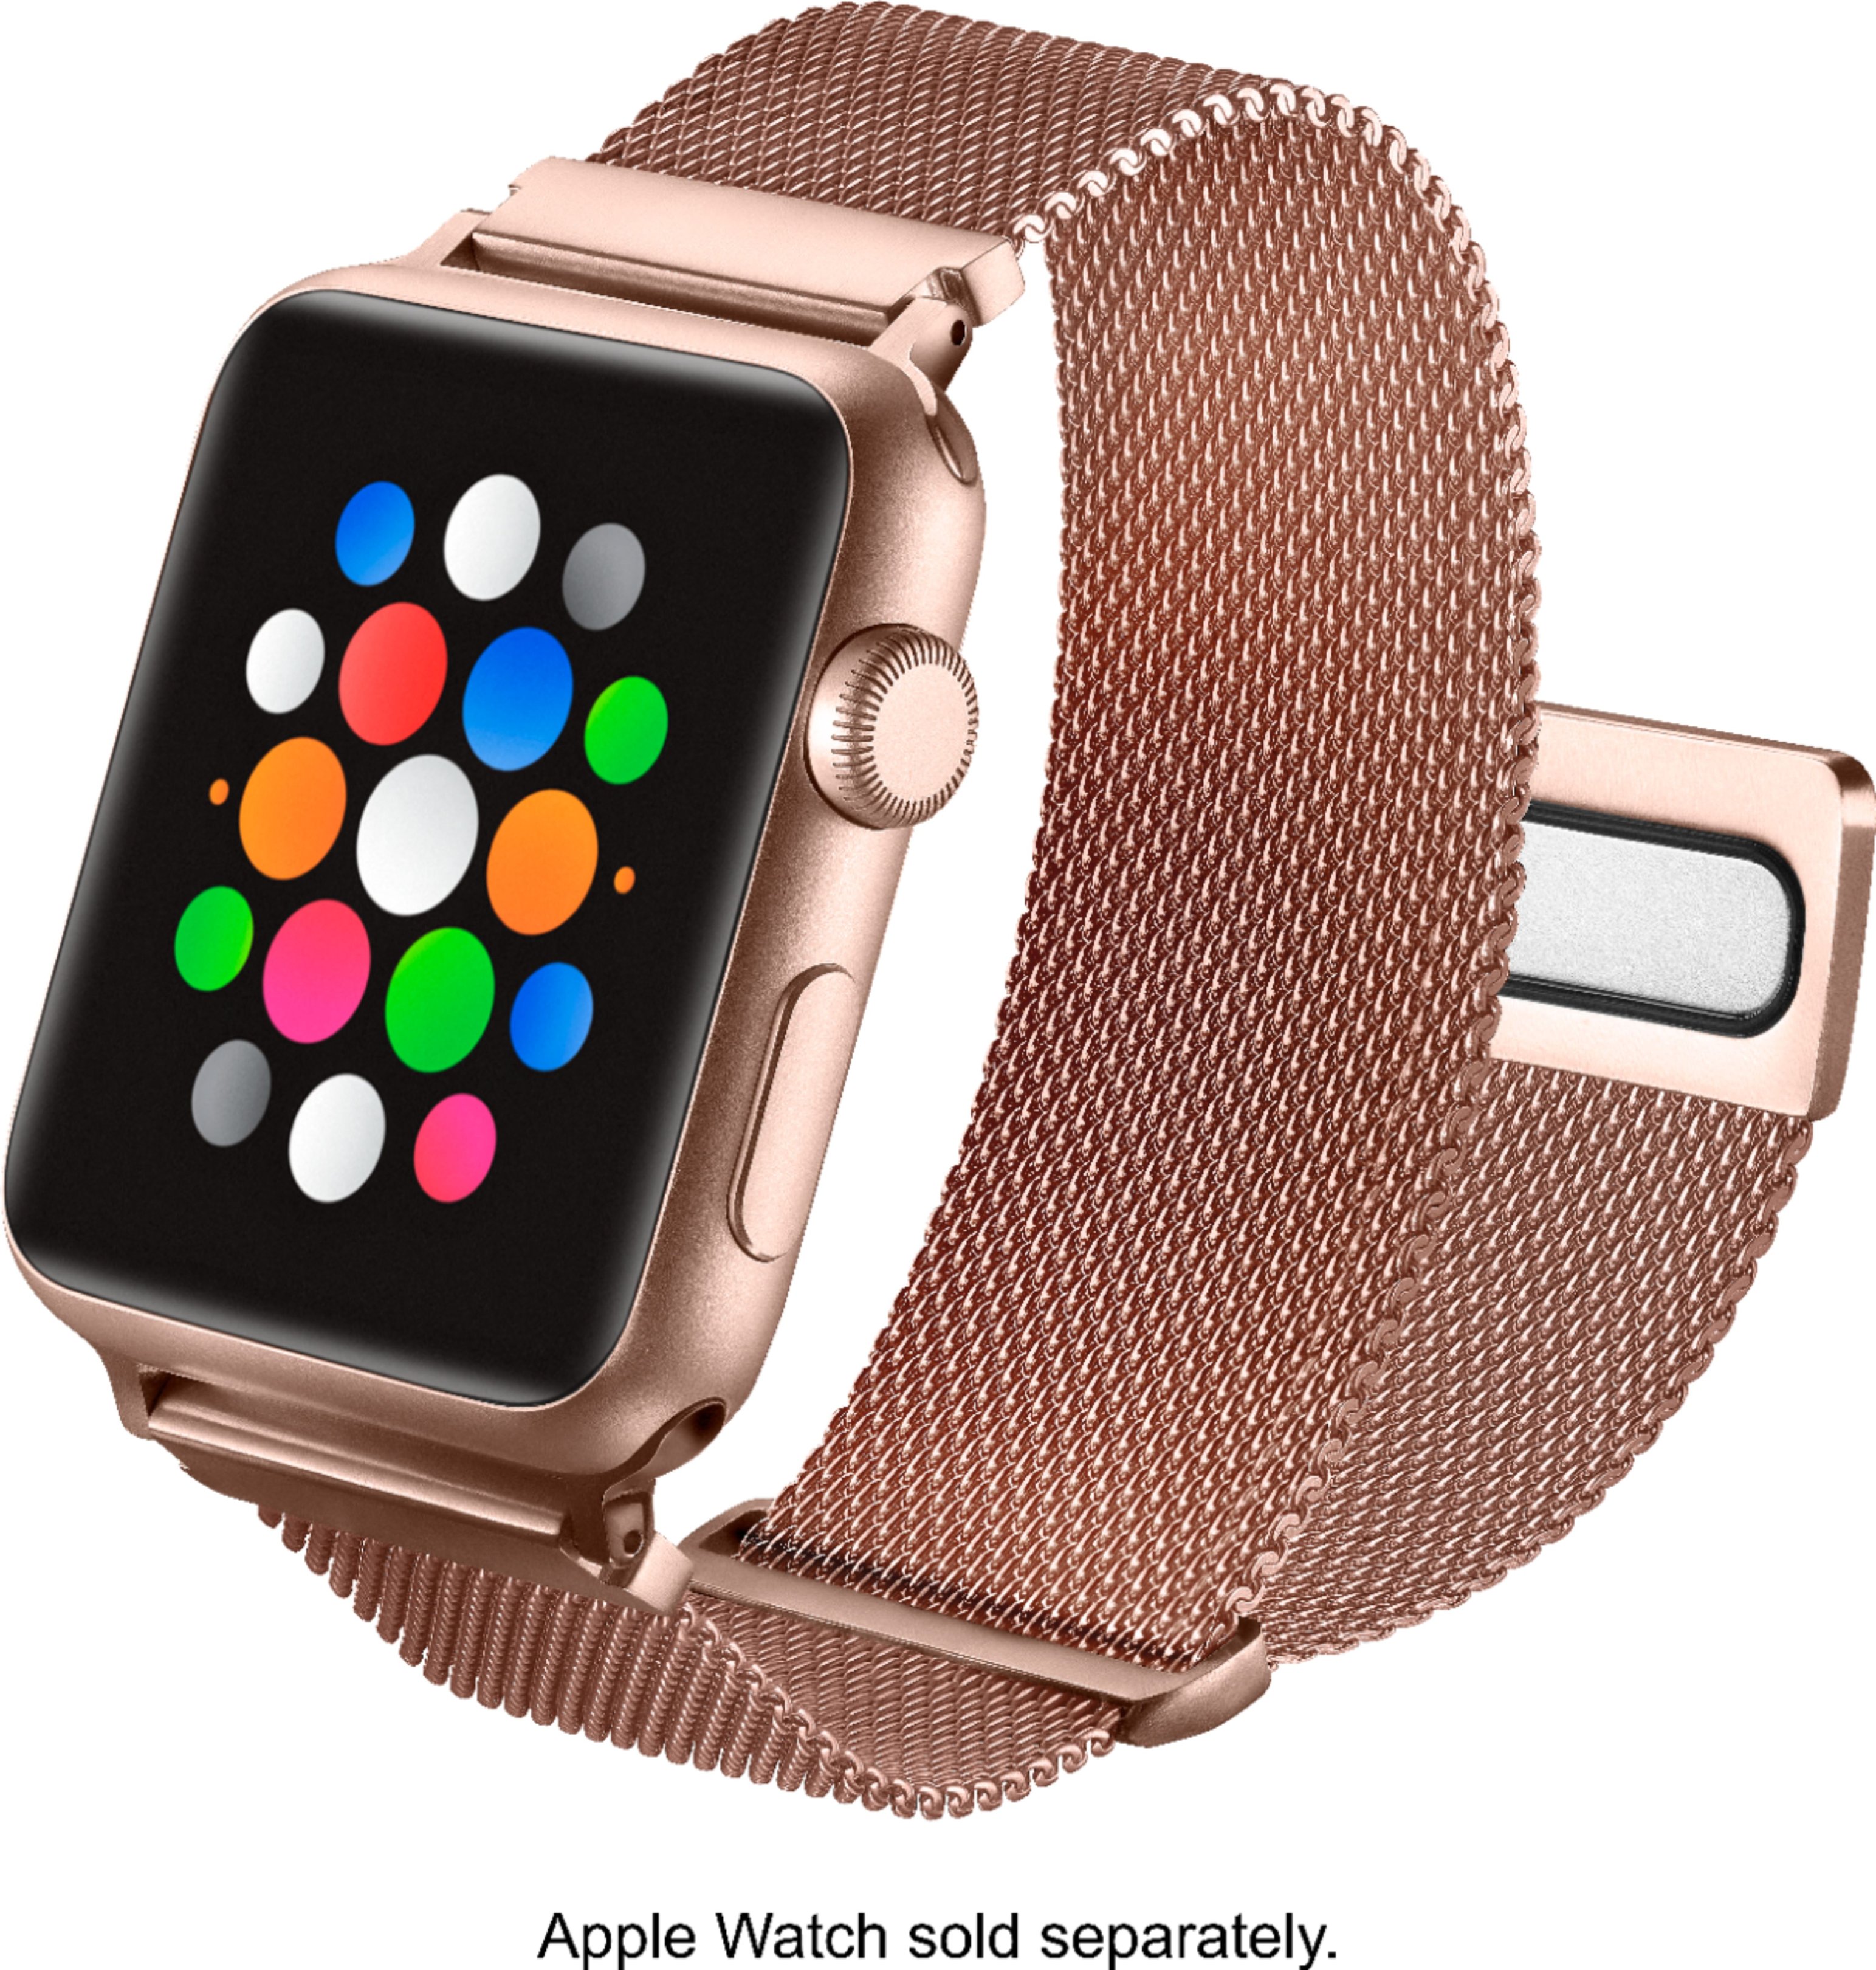 Platinum™ Magnetic Stainless Steel Mesh Band for Apple Watch 42mm 